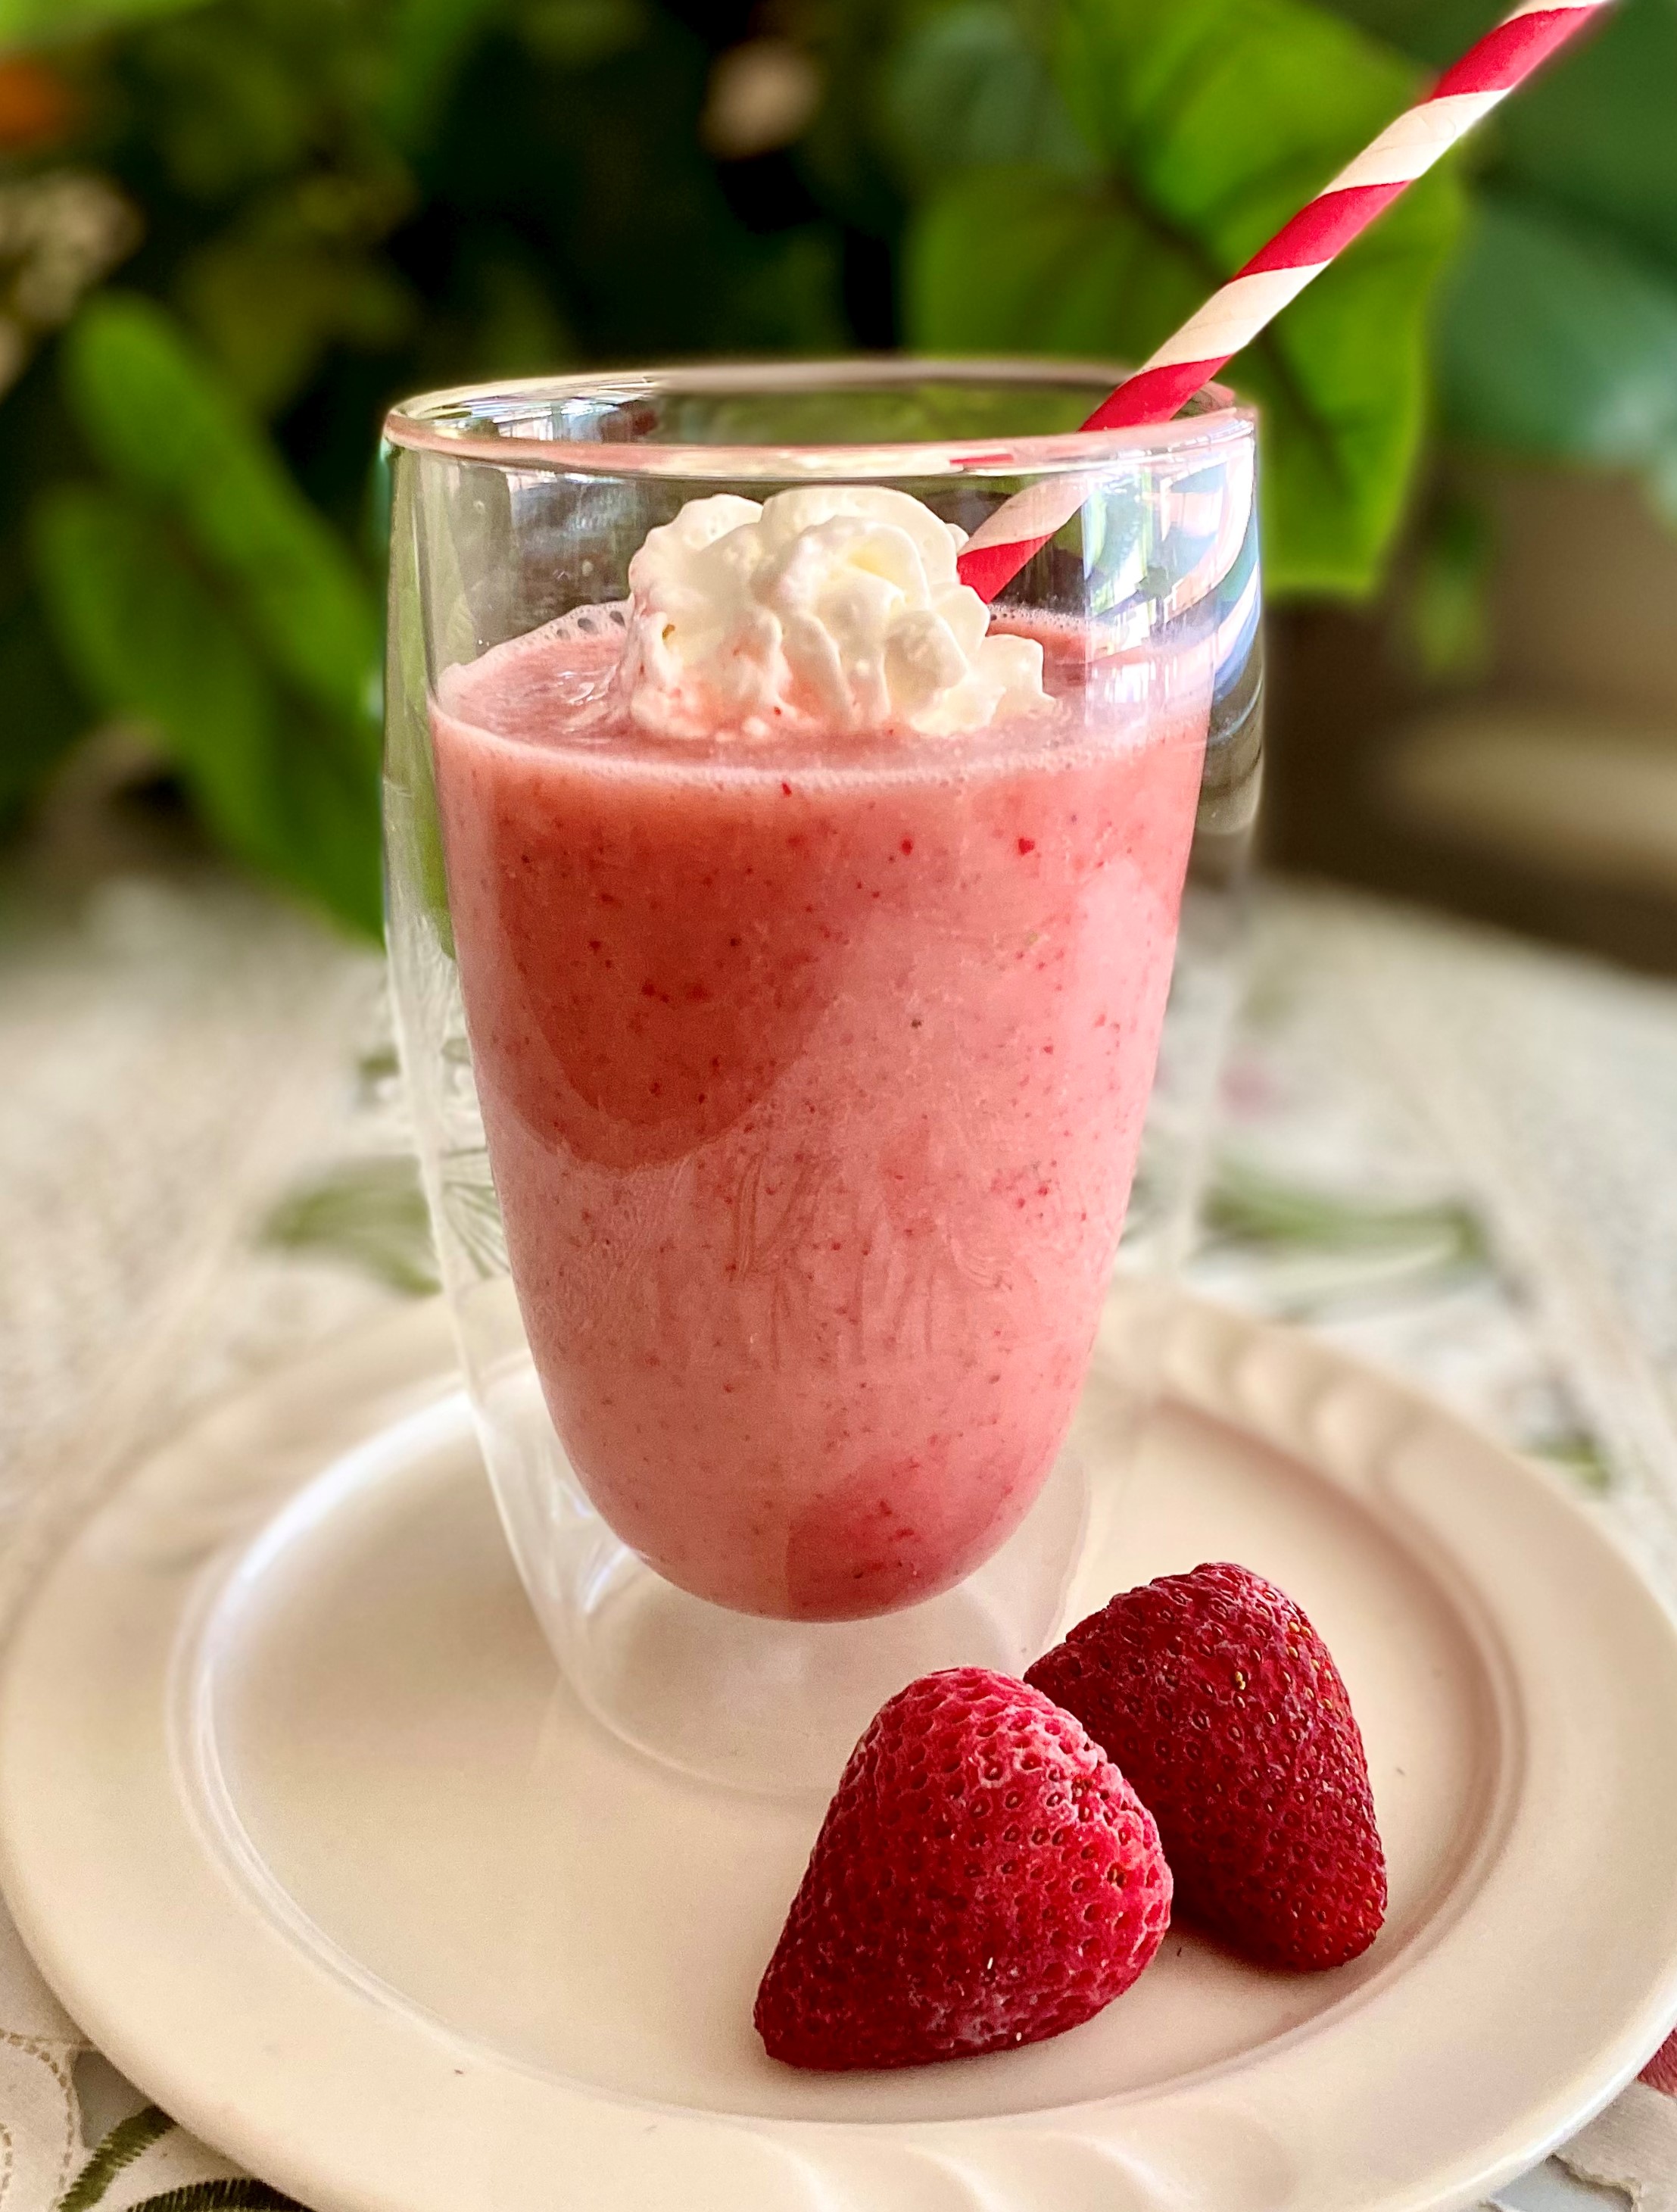 Whip Up a Scrumptious, Nutritious Strawberry Shake!